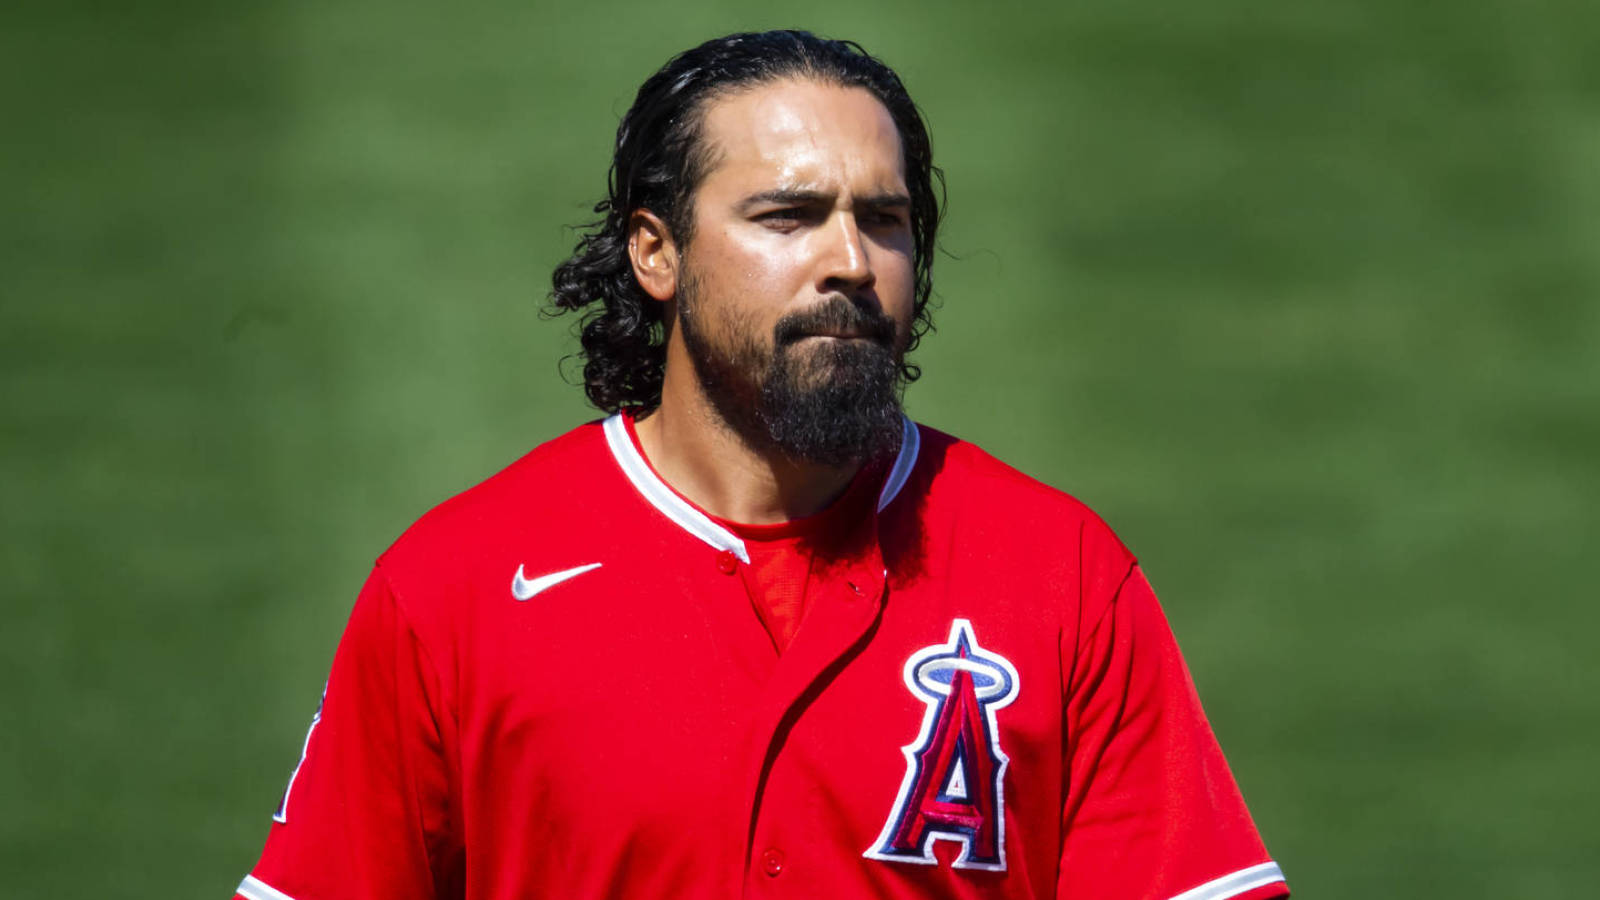 Angels place Anthony Rendon on 10-day IL